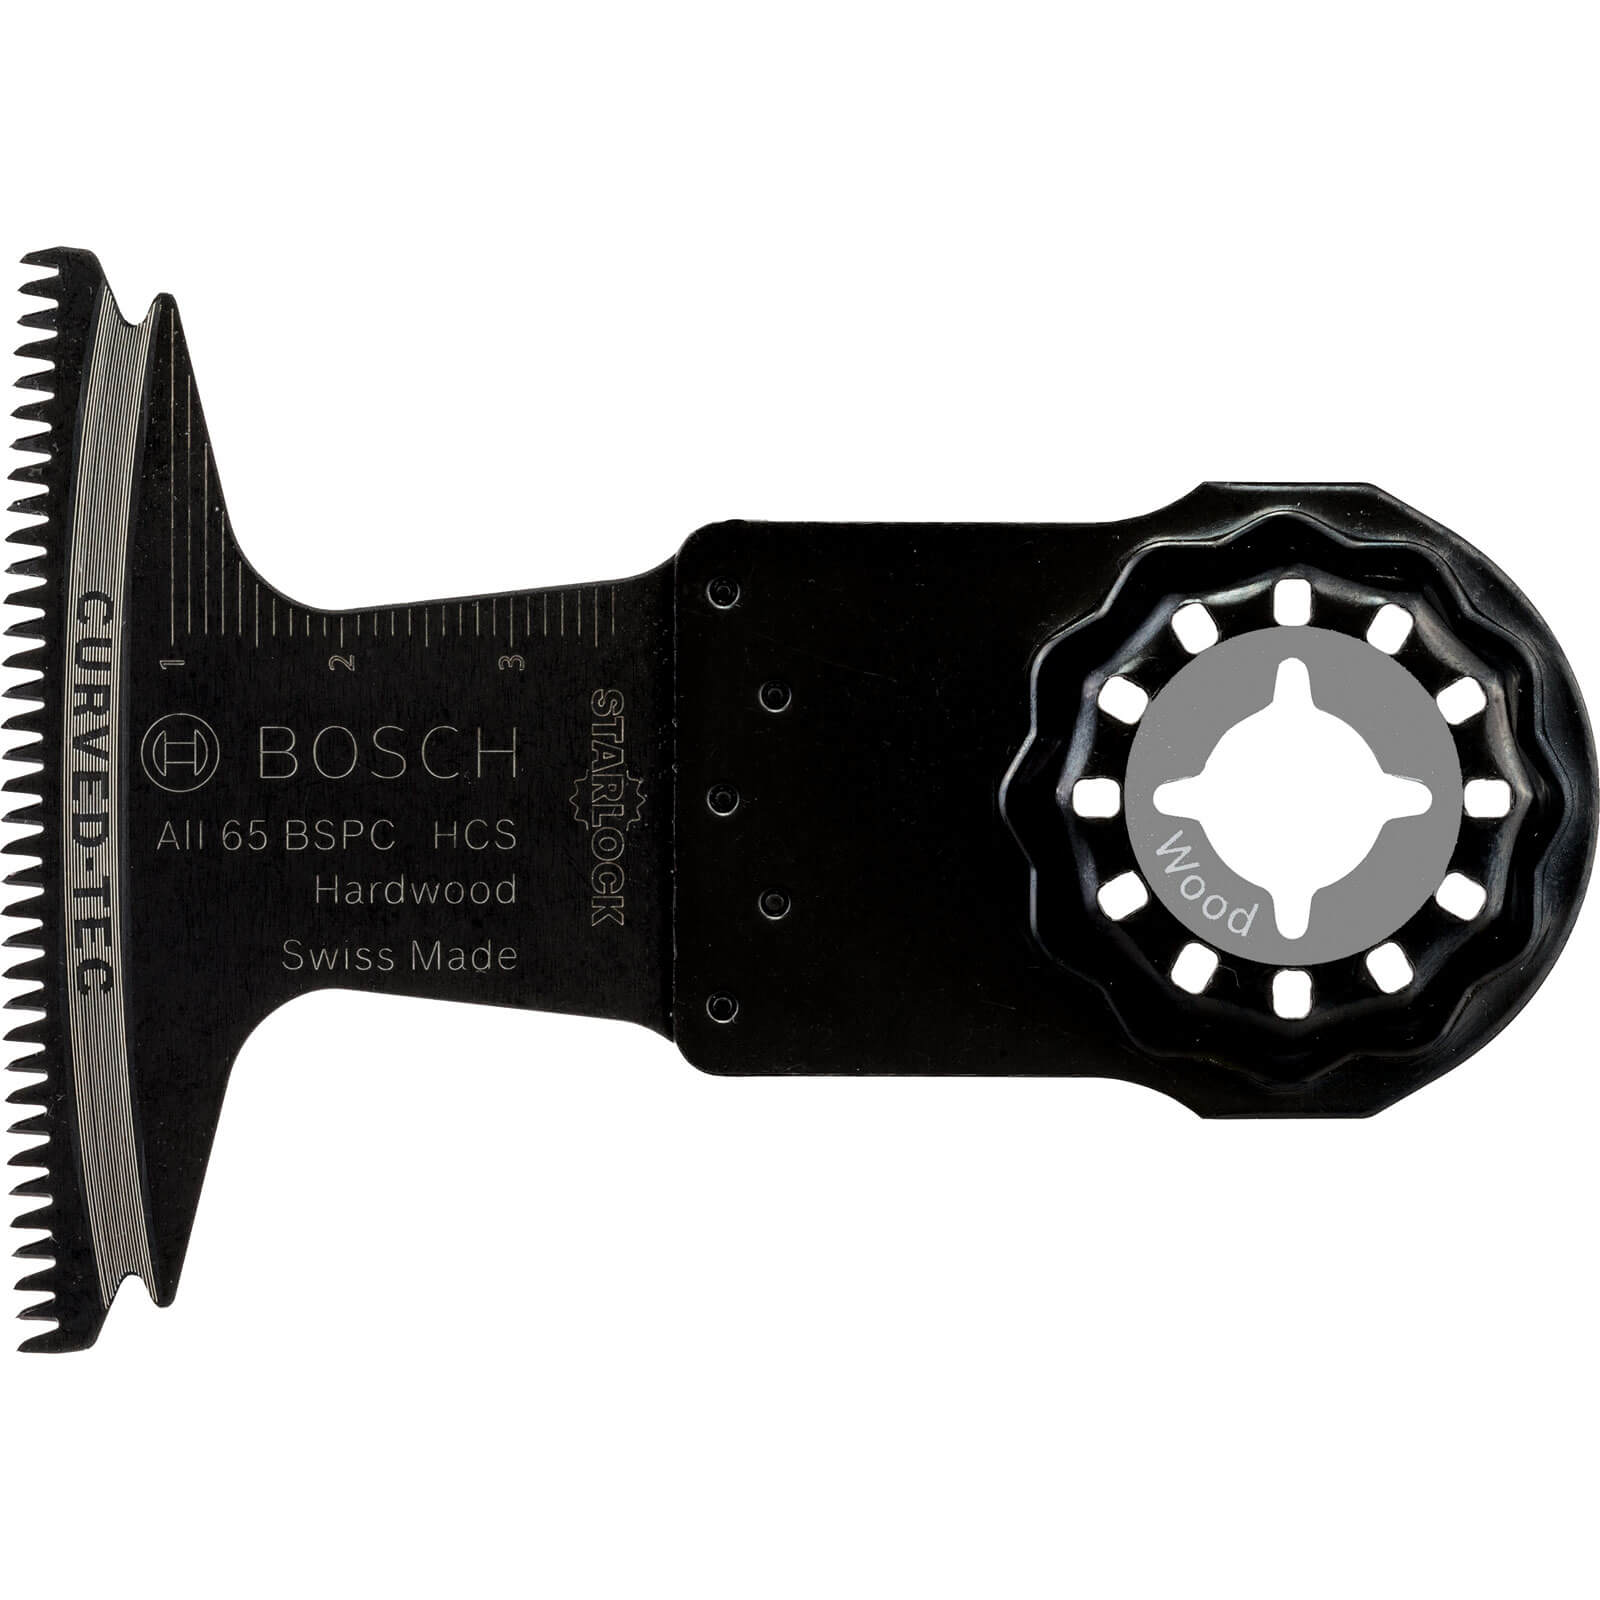 Image of Bosch AII 65 BSPC HCS Hard Wood Starlock Oscillating Multi Tool Plunge Saw Blade 65mm Pack of 1